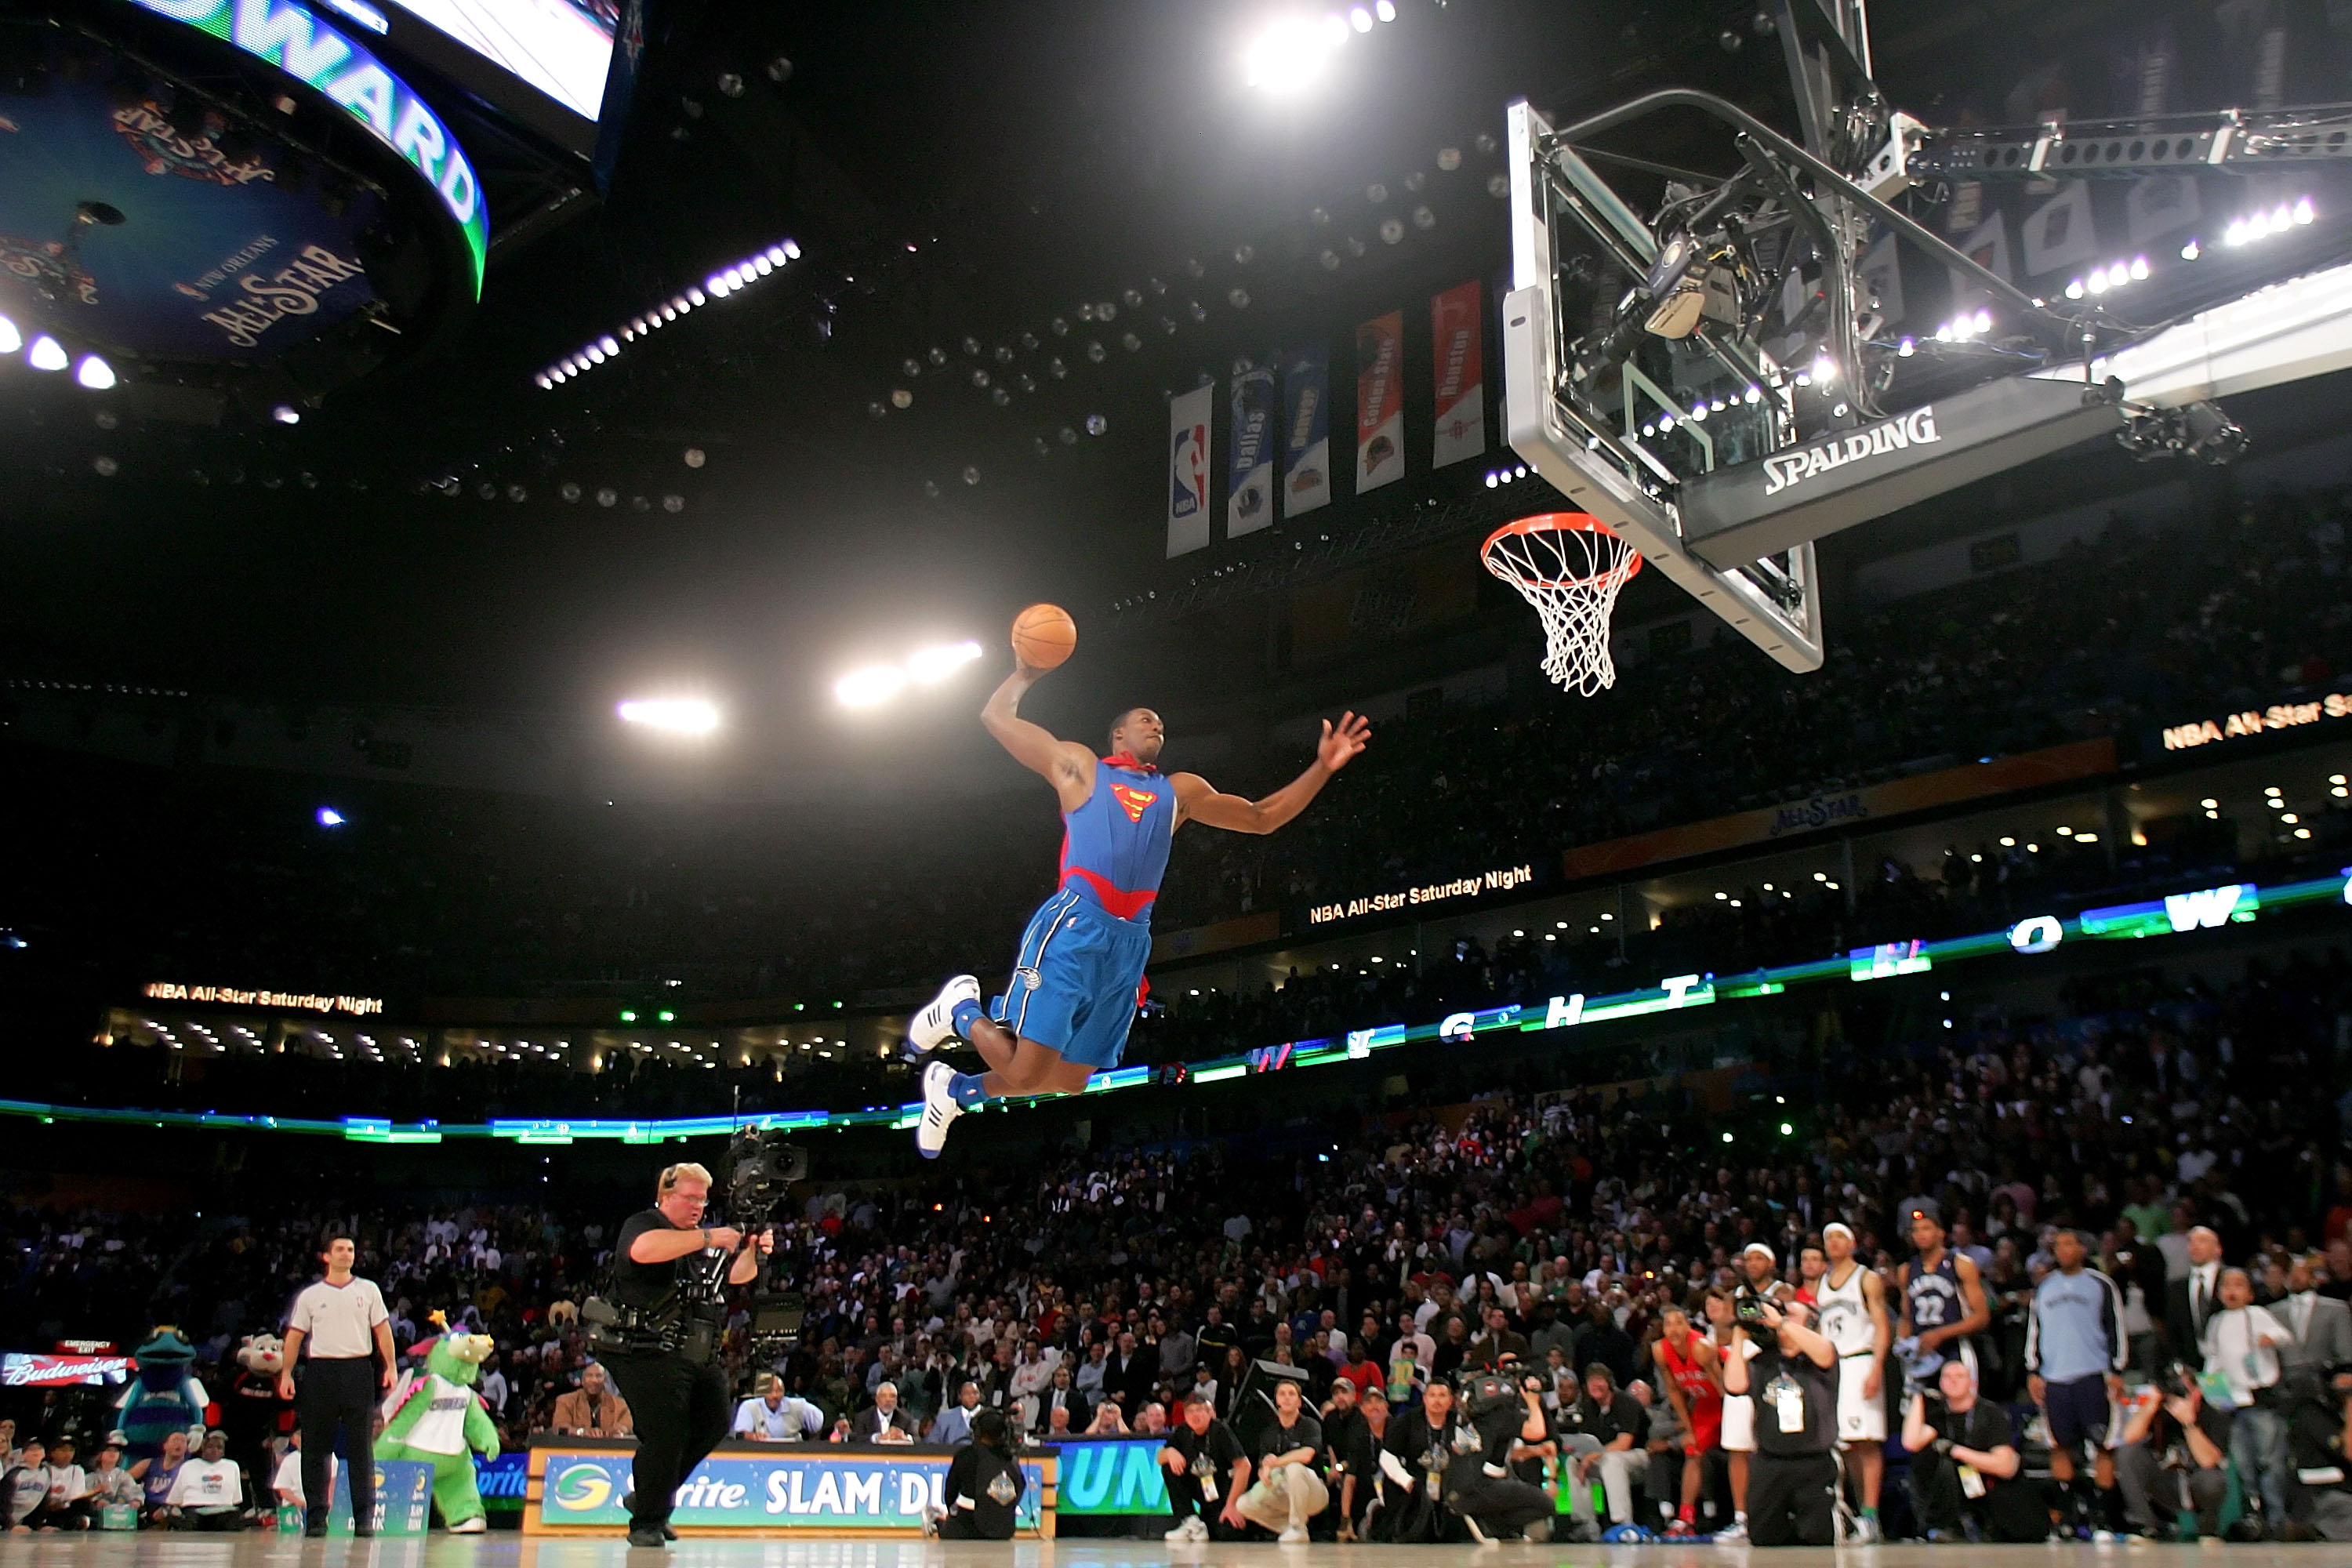 NEW ORLEANS - FEBRUARY 16:  Dwight Howard of the Orlando Magic completes a dunk in the Sprite Slam Dunk Contest, part of 2008 NBA All-Star Weekend at the New Orleans Arena on February 16, 2008 in New Orleans, Louisiana.  NOTE TO USER: User expressly ackno